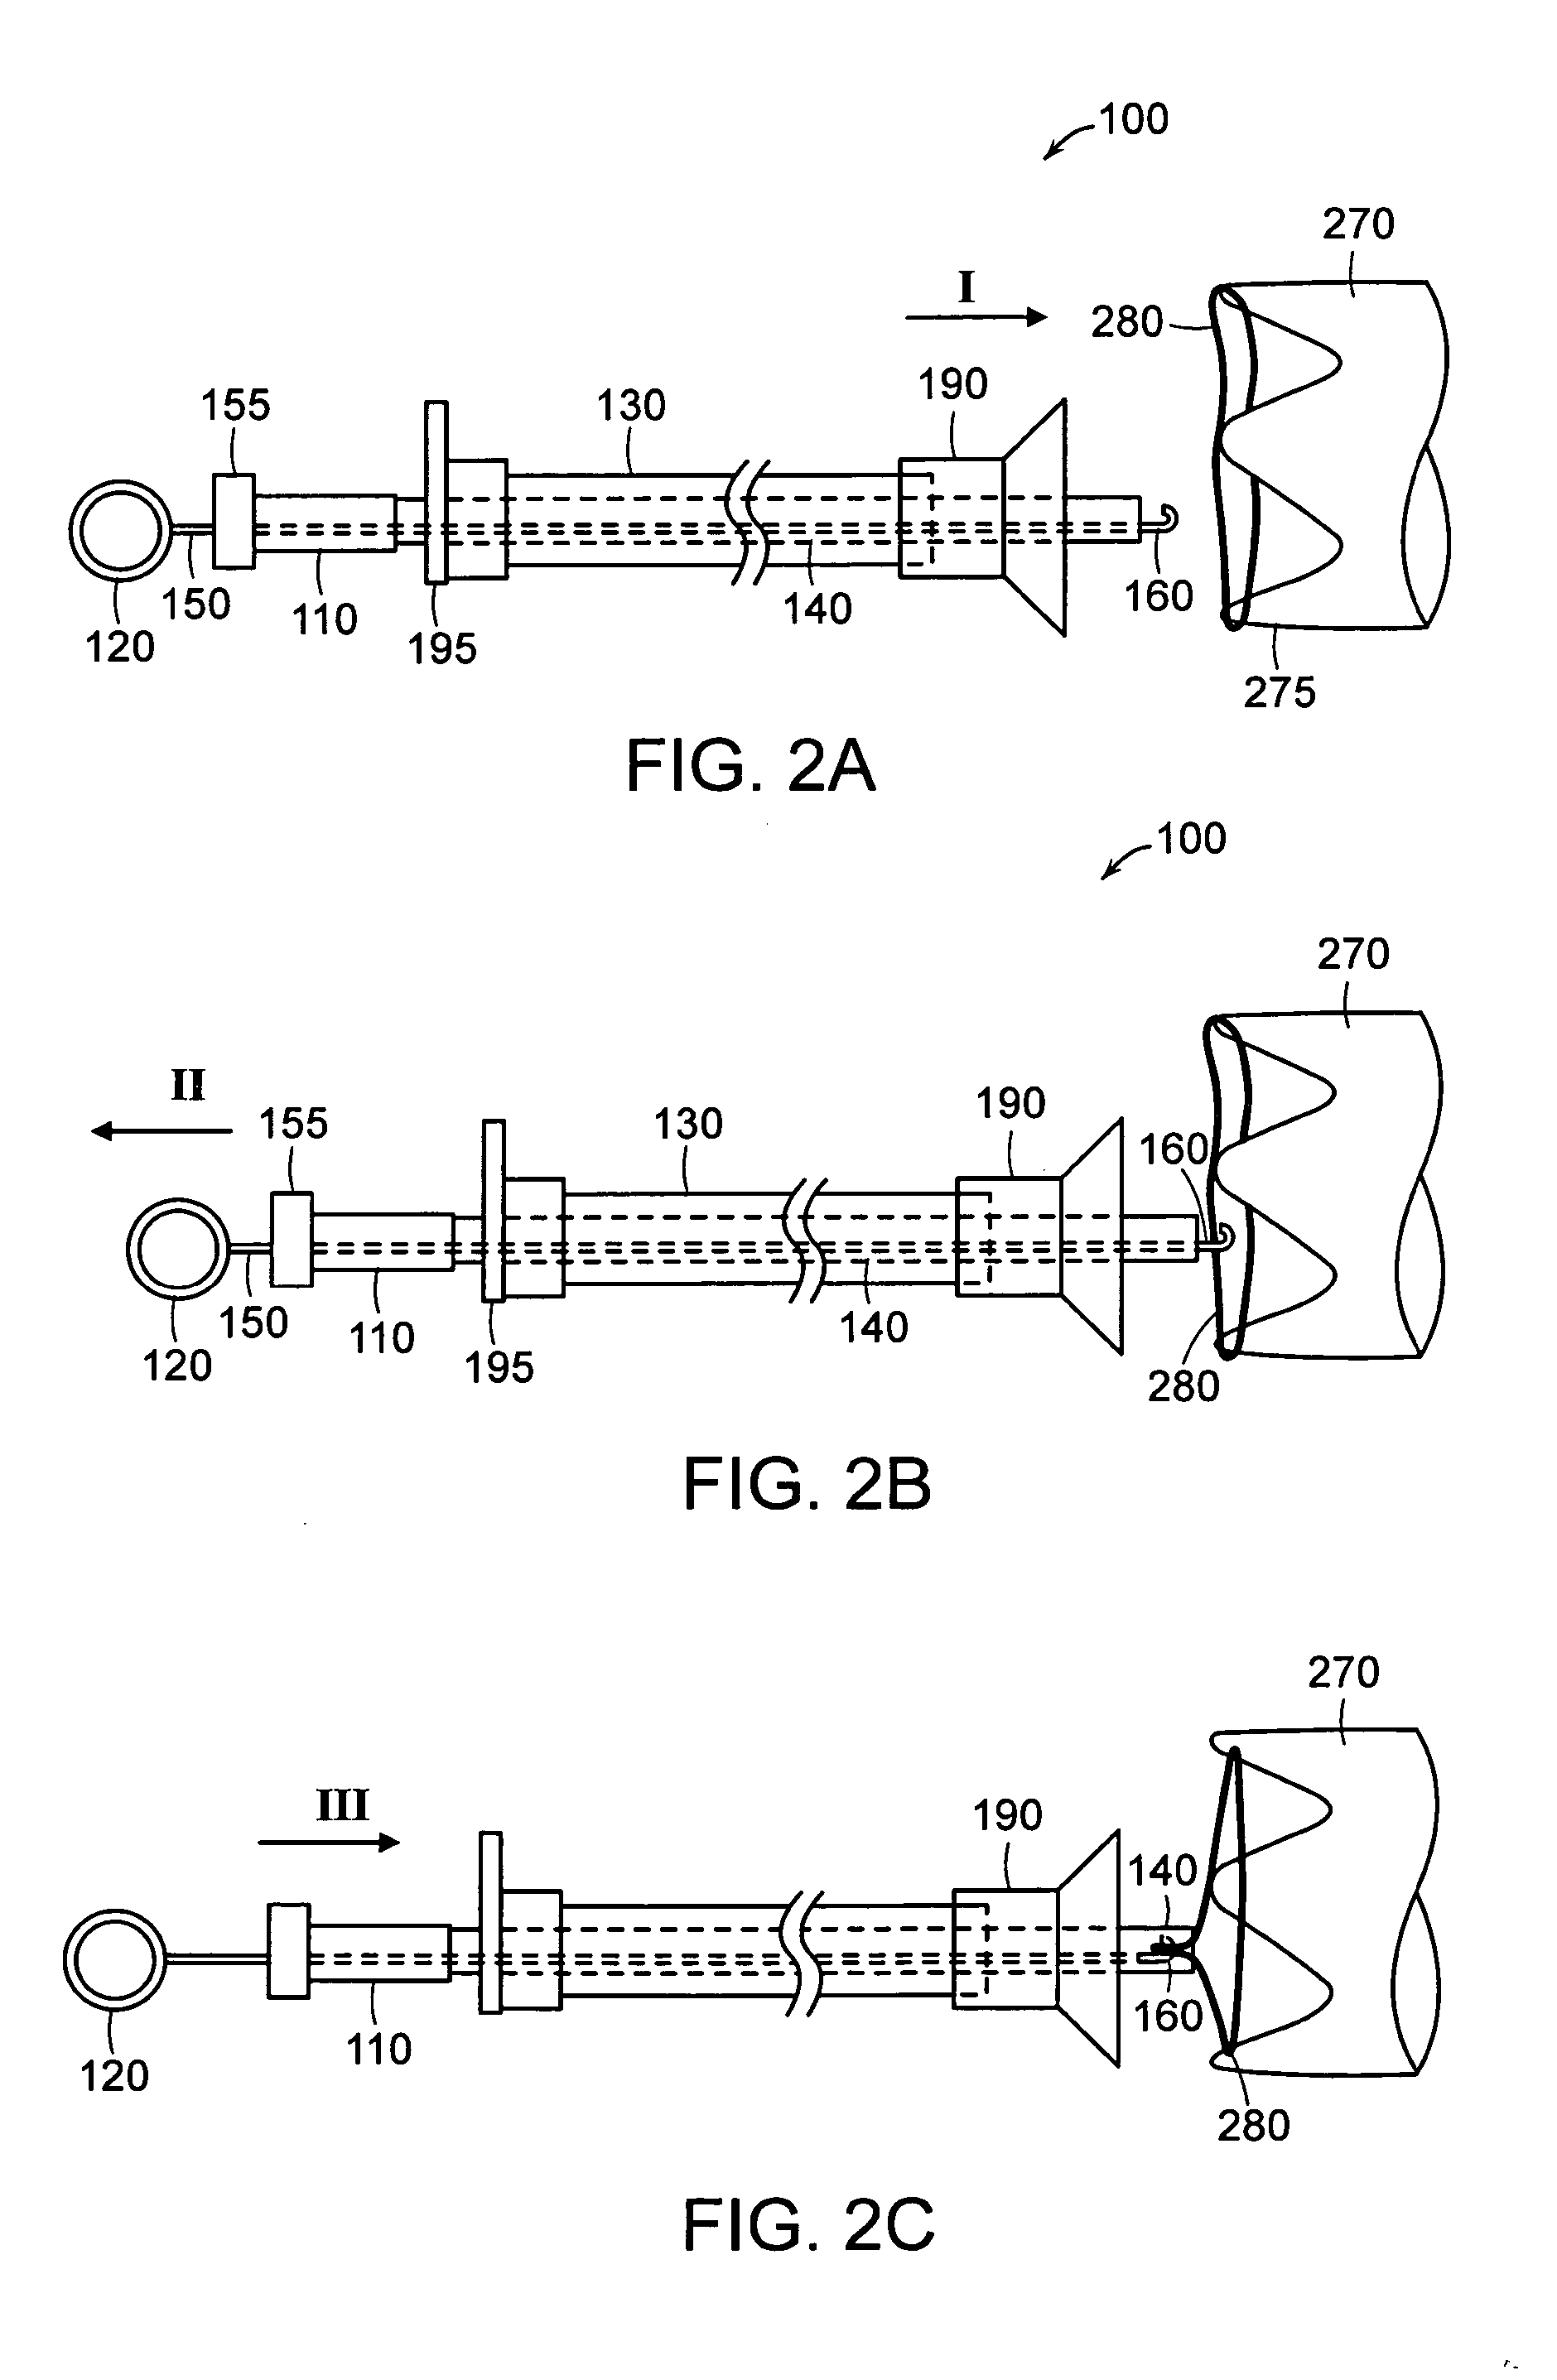 Removal and repositioning device